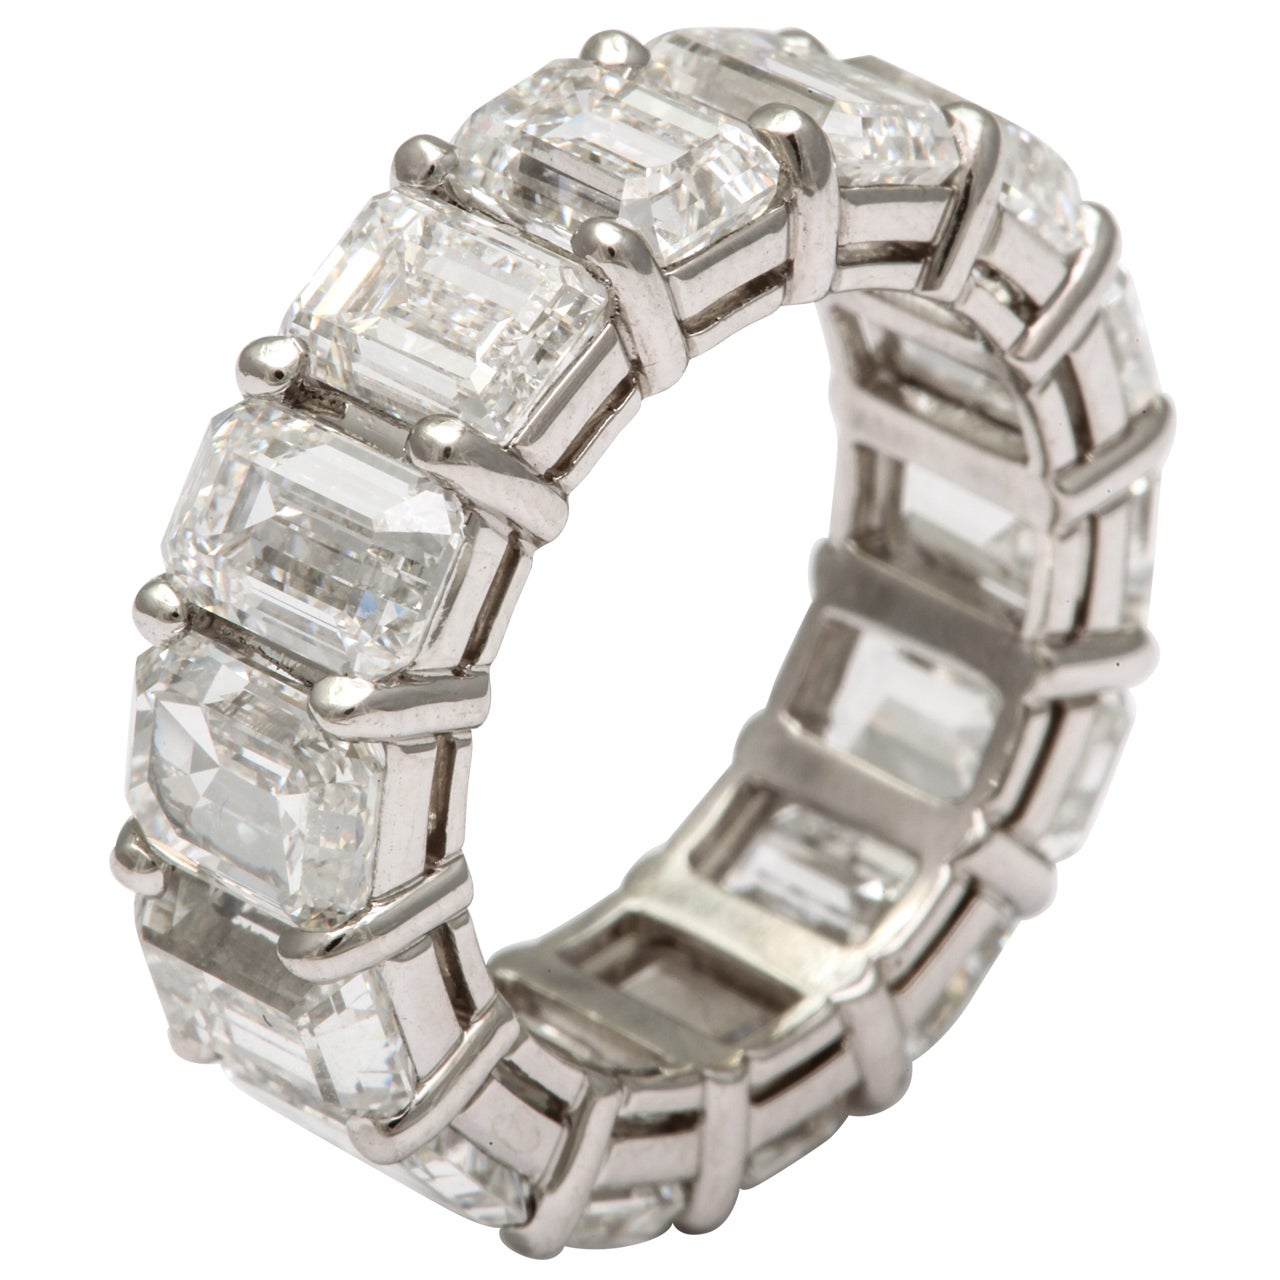 All GIA Certified Emerald Cut Wedding Band, Over 1 Carat Each For Sale